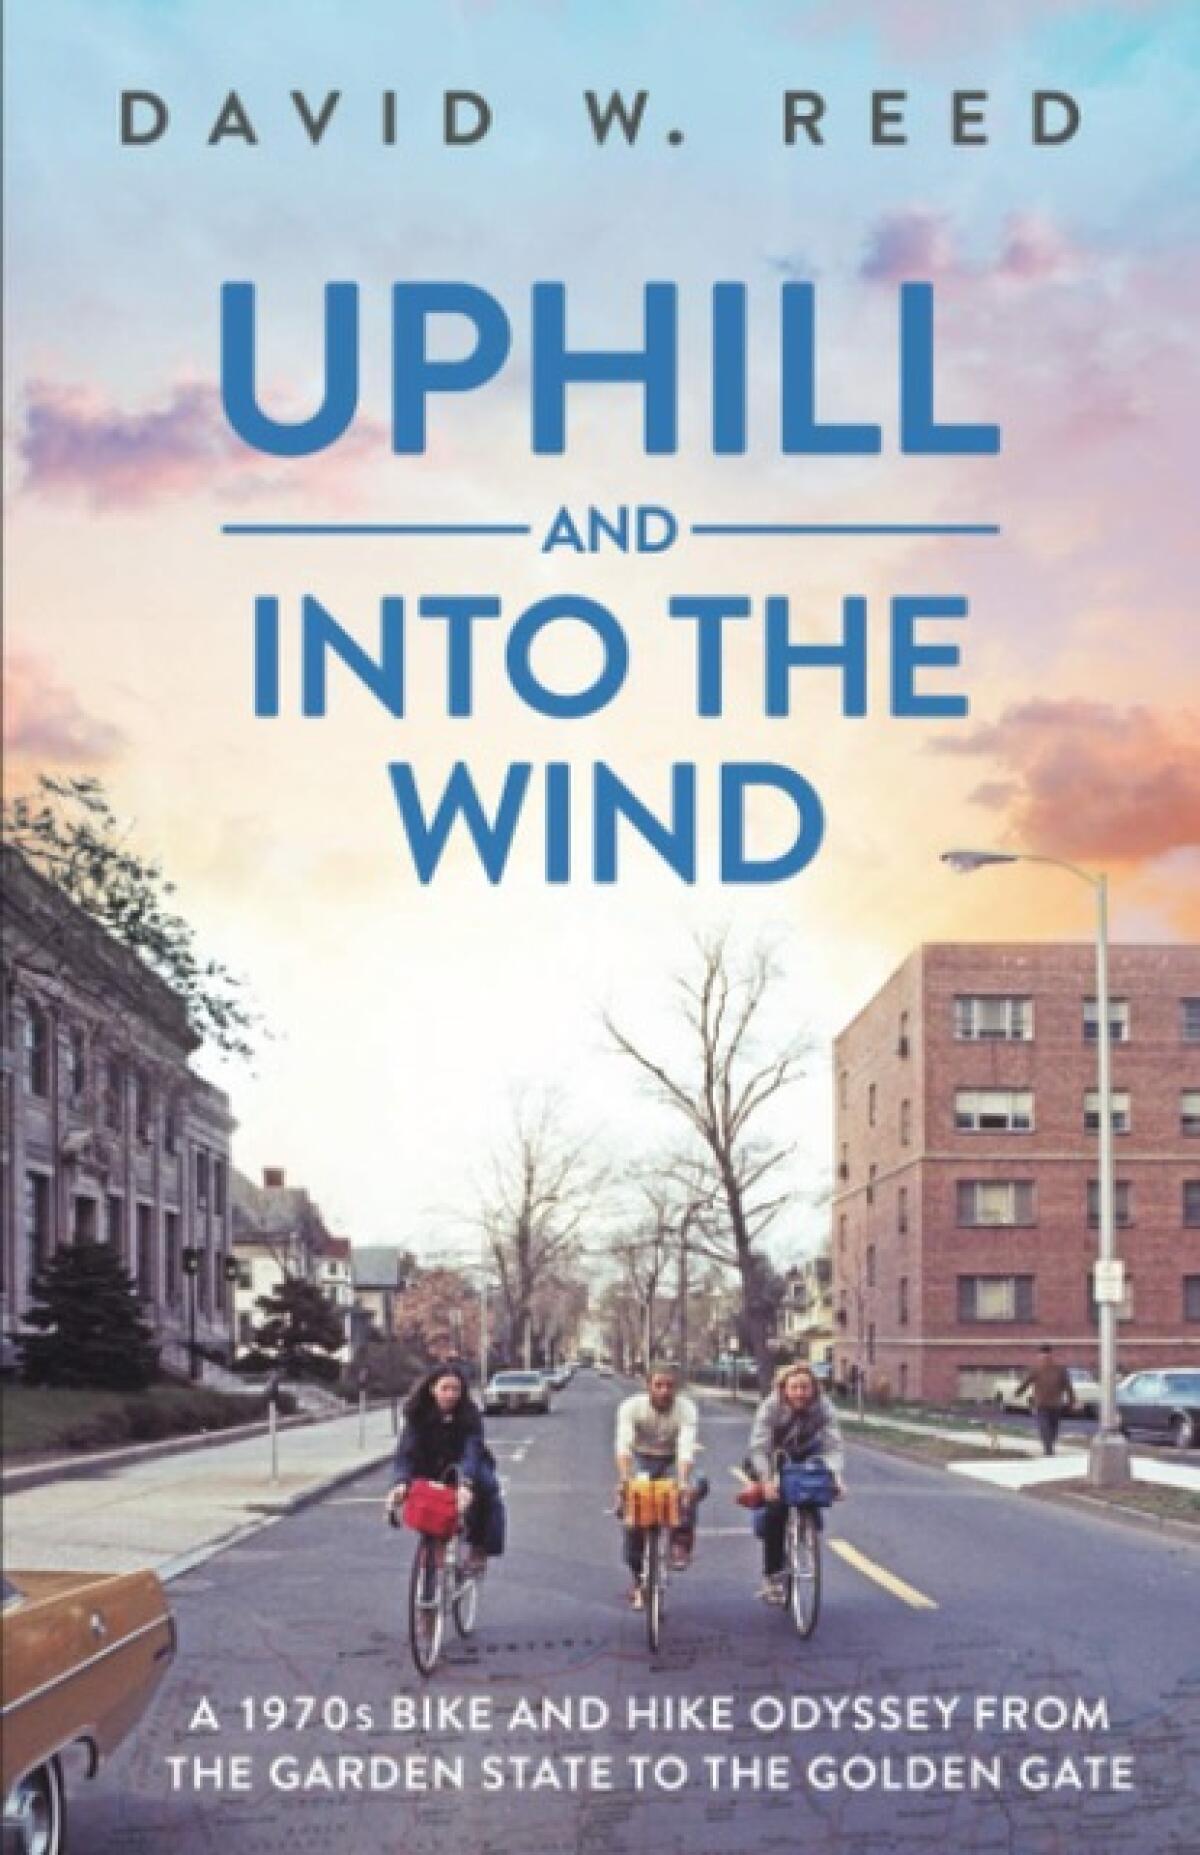 The cover of "Uphill and Into the Wind"